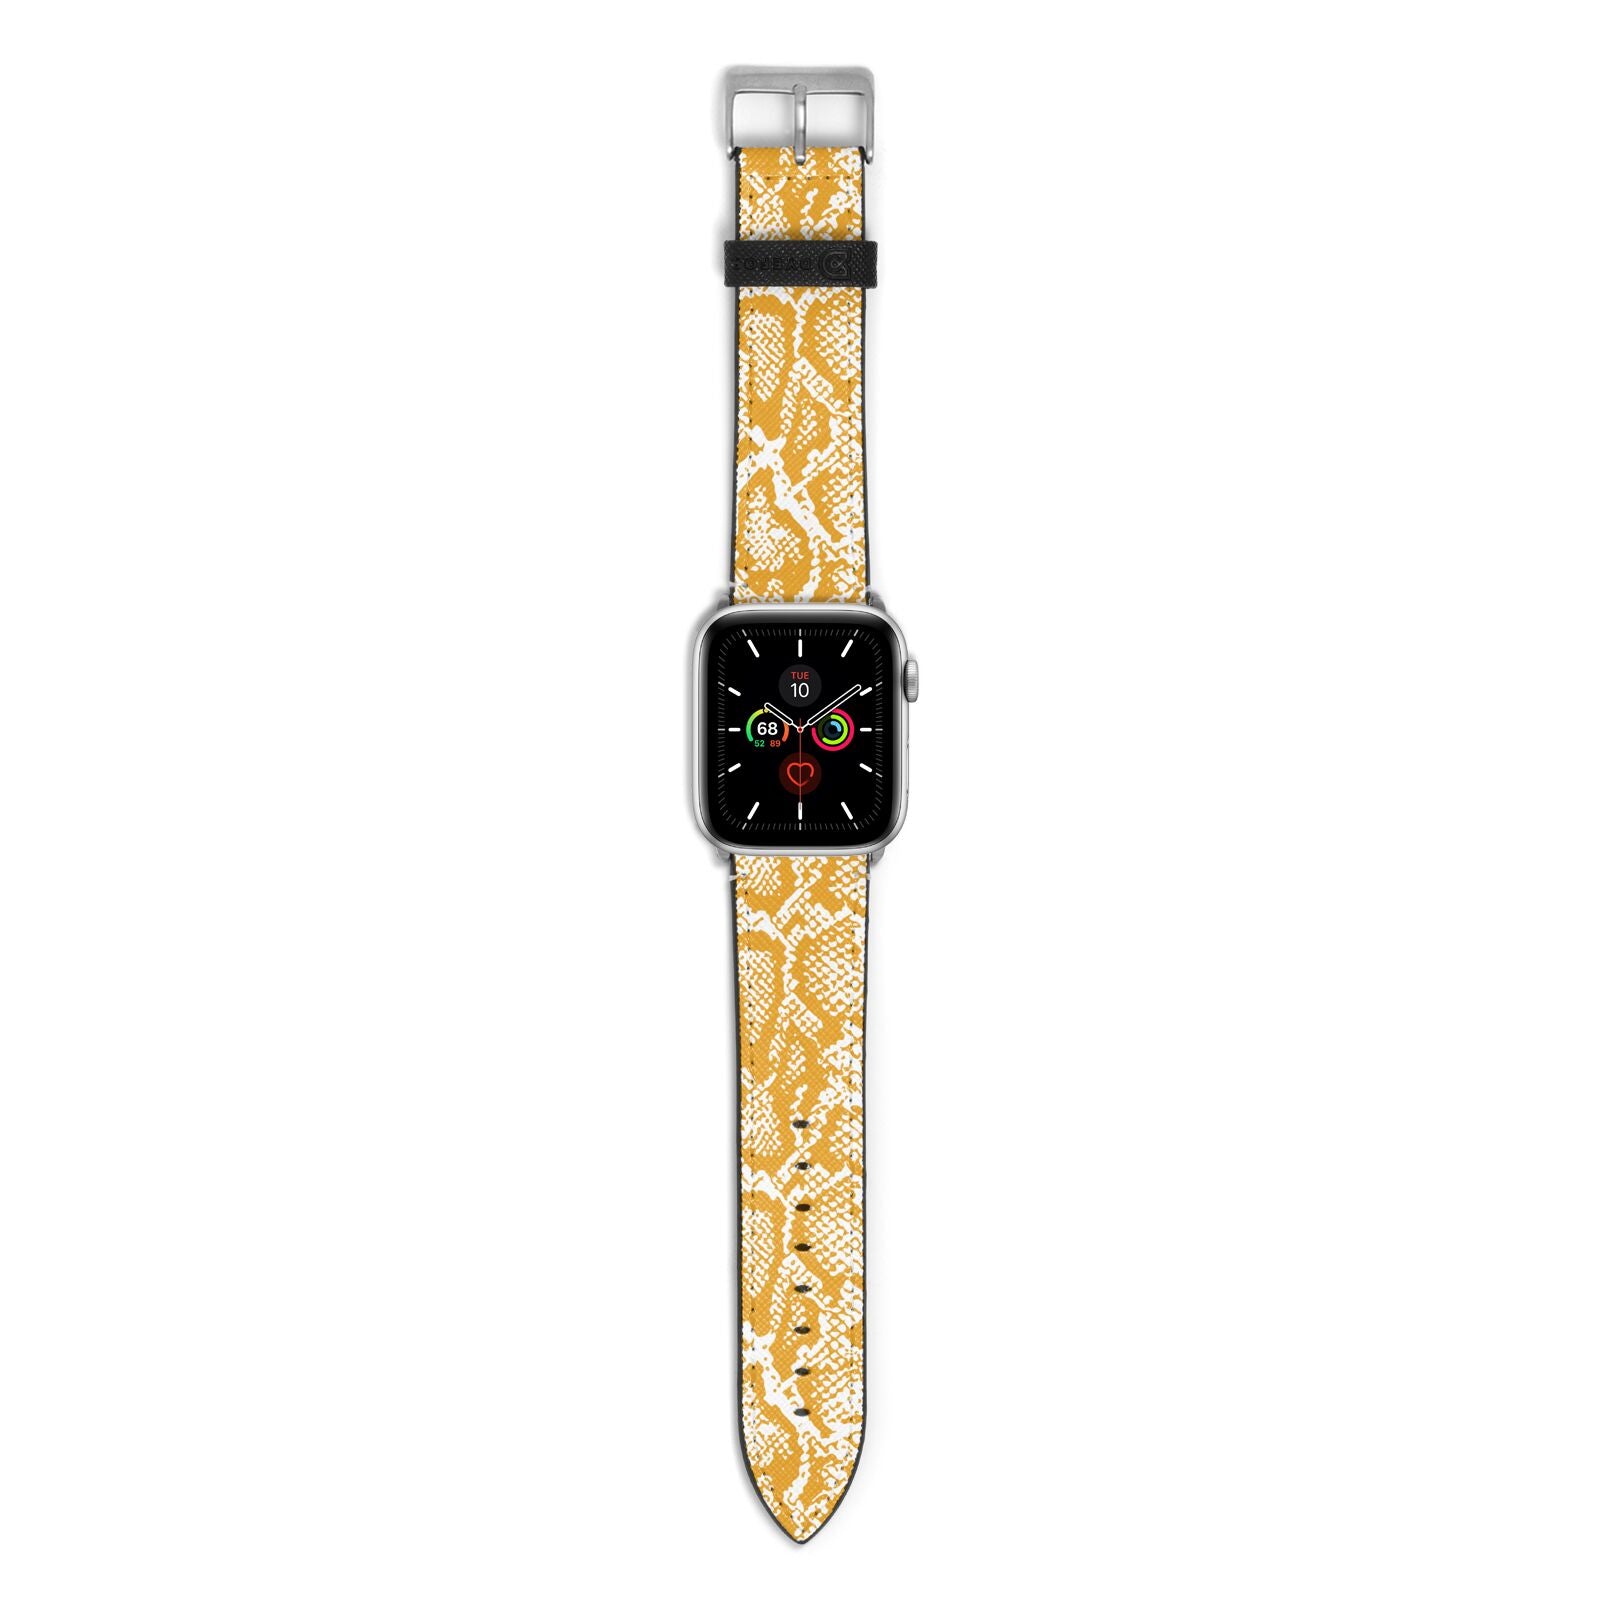 Yellow Snakeskin Apple Watch Strap with Silver Hardware